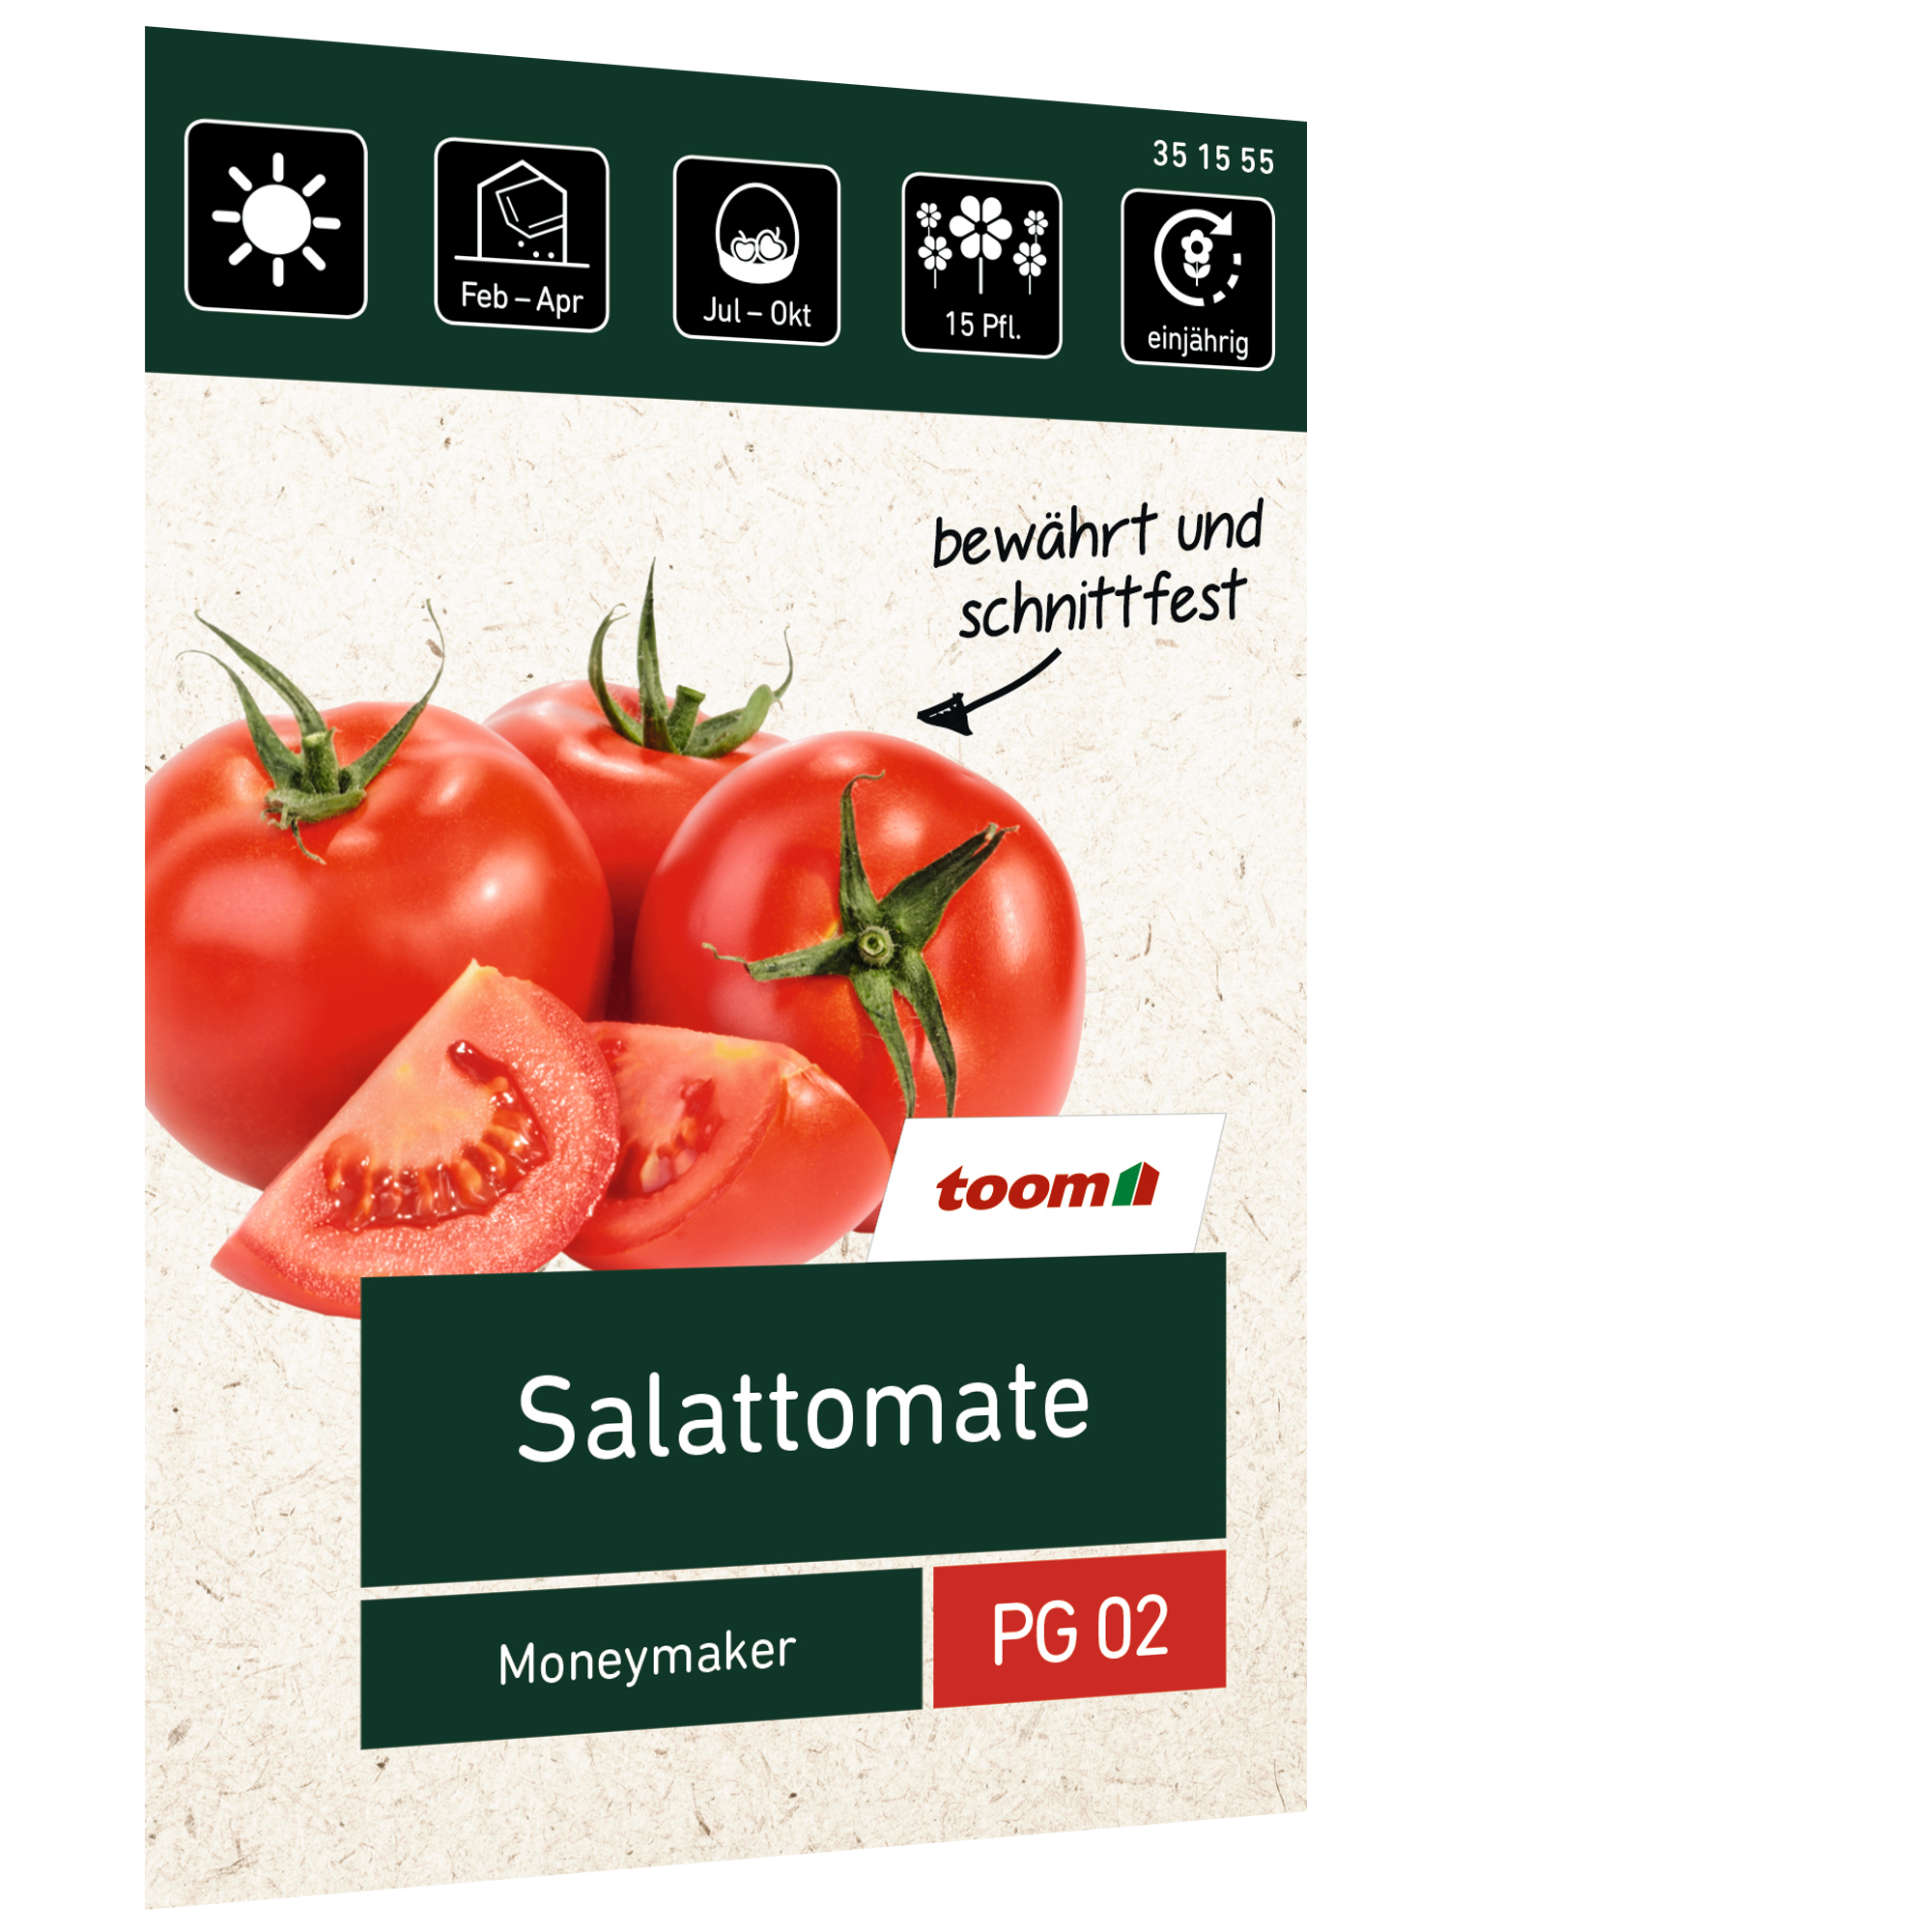 Salattomate 'Moneymaker' + product picture